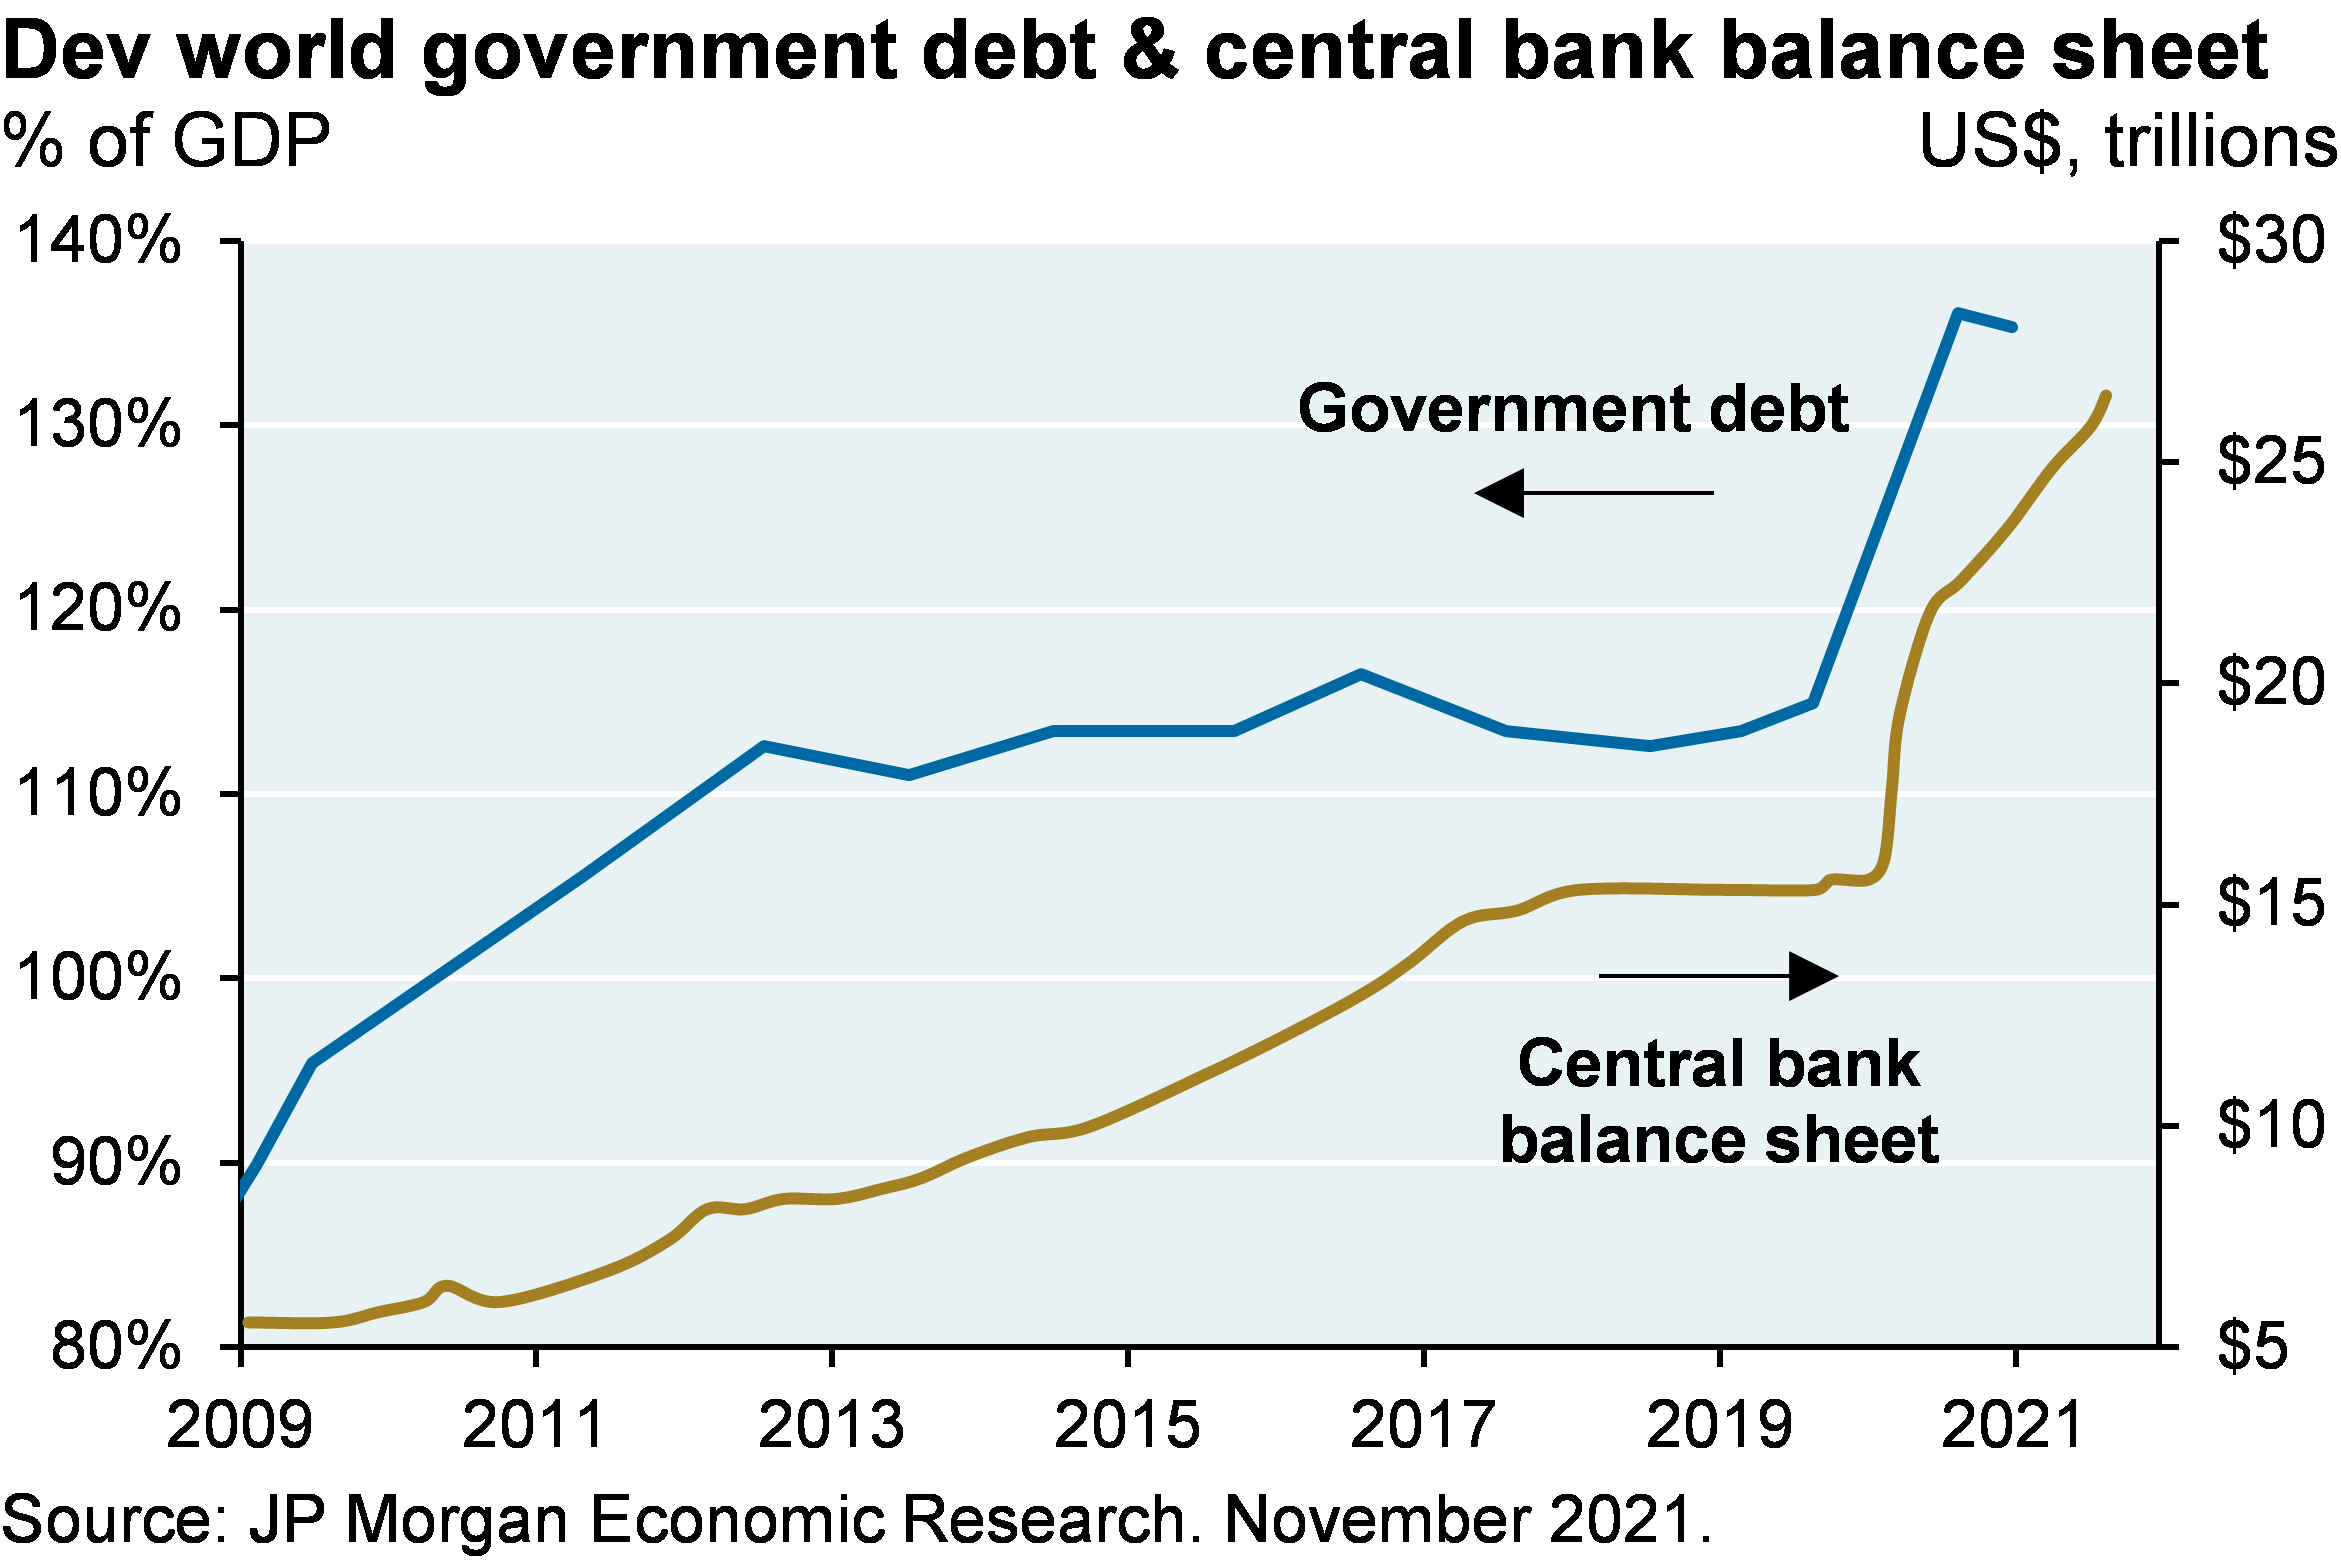 Line chart shows developed world government debt and central bank balance sheets, with government debt shown as % of GDP and central bank balance sheet shown in trillions of US dollars. Since 2009, both government debt and central bank have steadily increased, and in 2020 both measures spiked to their highest levels. 